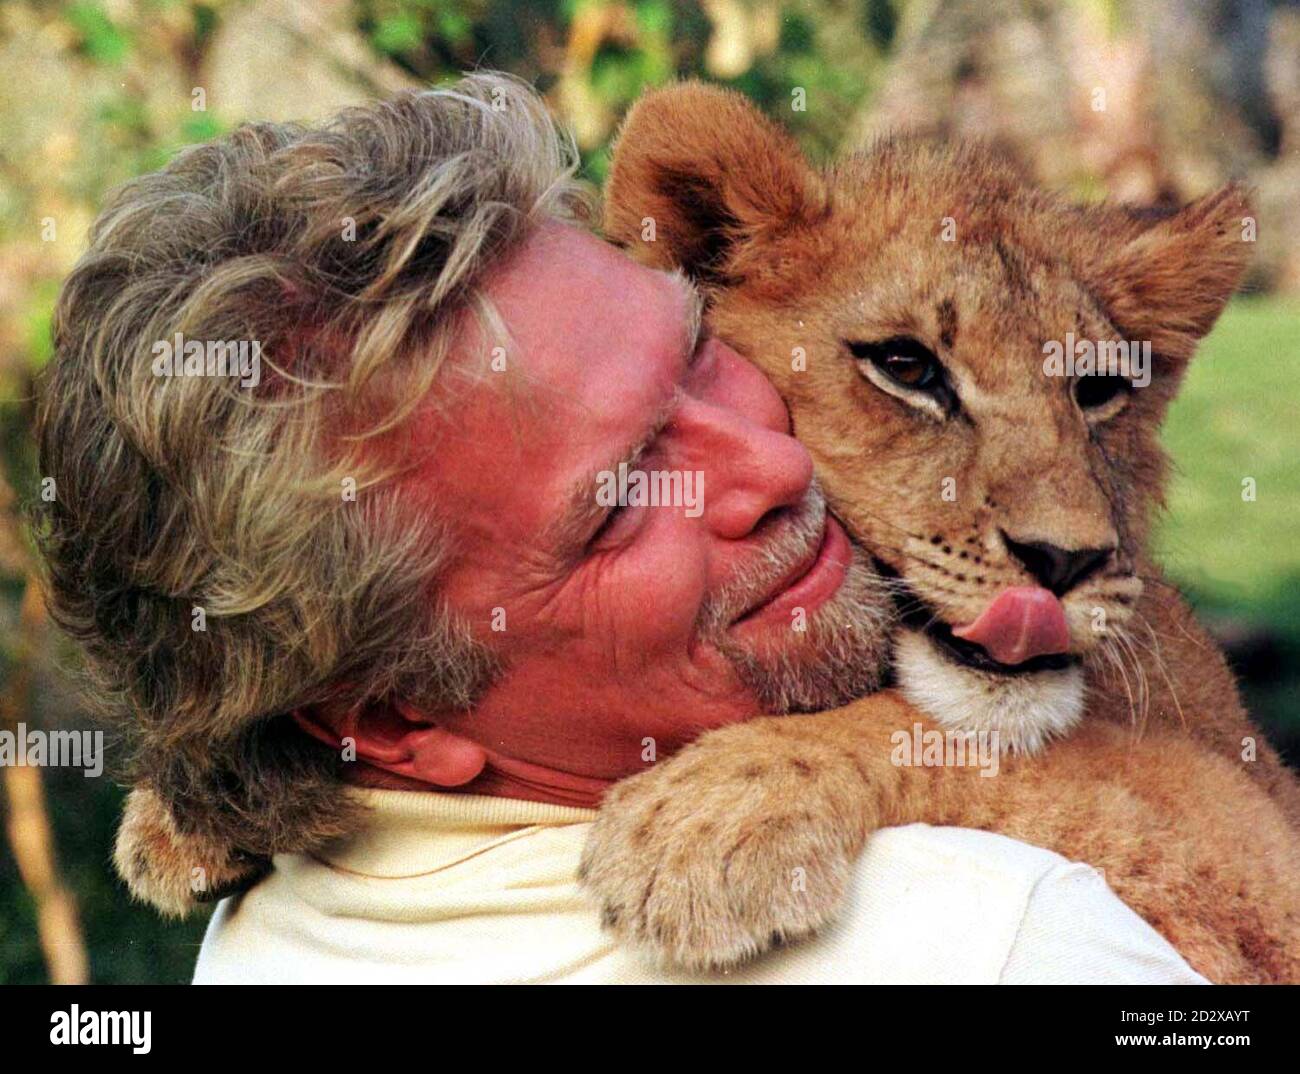 Virgin boss Richard Branson cuddles a young lion cub at Sun City in South Africa after ariving on his  inaugural flight to Johannesburg, South Africa, last Thursday. Photo by Adam Butler/PA. Stock Photo